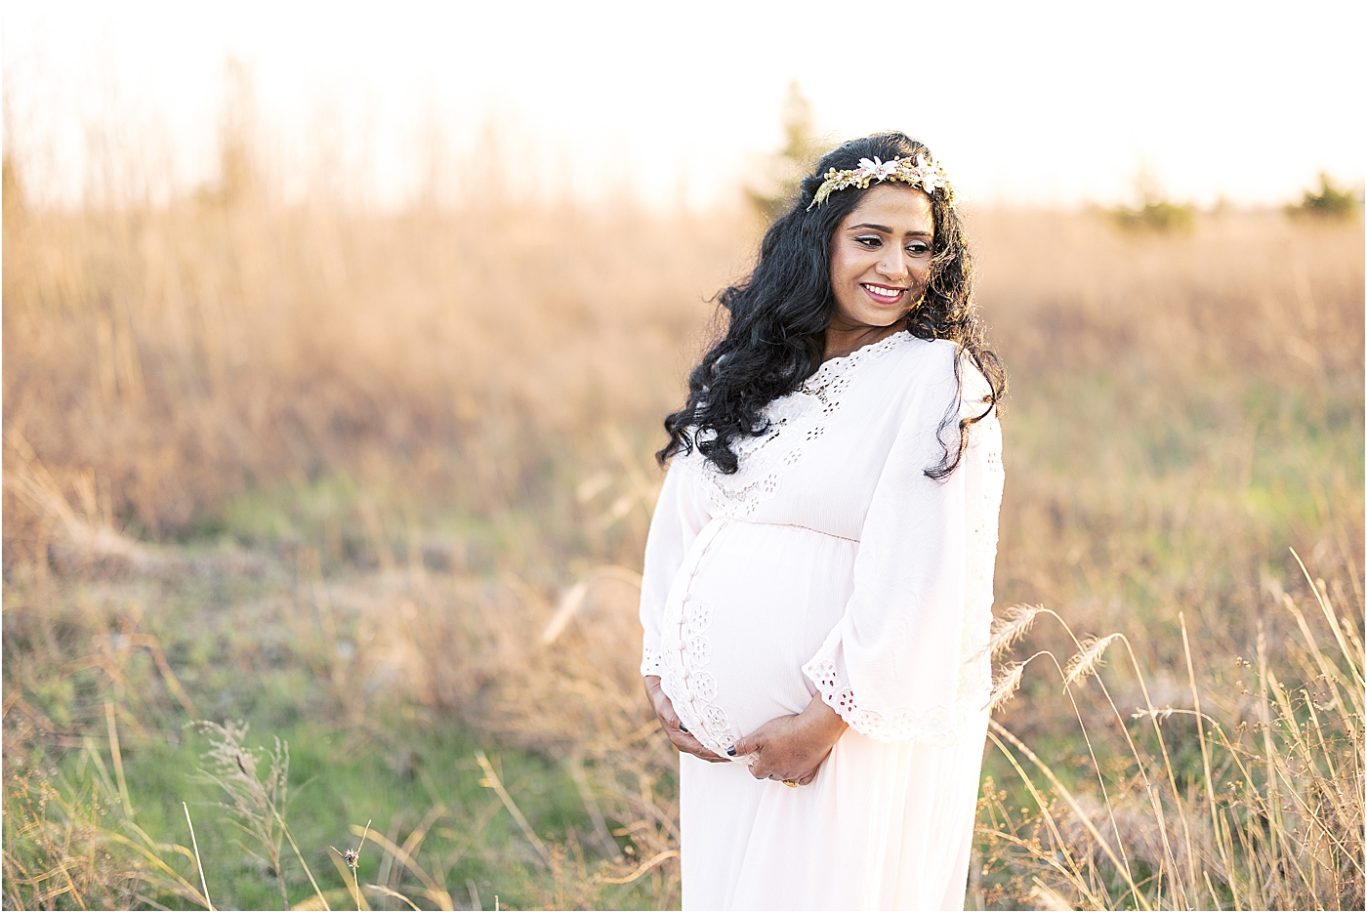 Glowing Mama-to-be during maternity photos. Photo by Lindsay Konopa Photography.